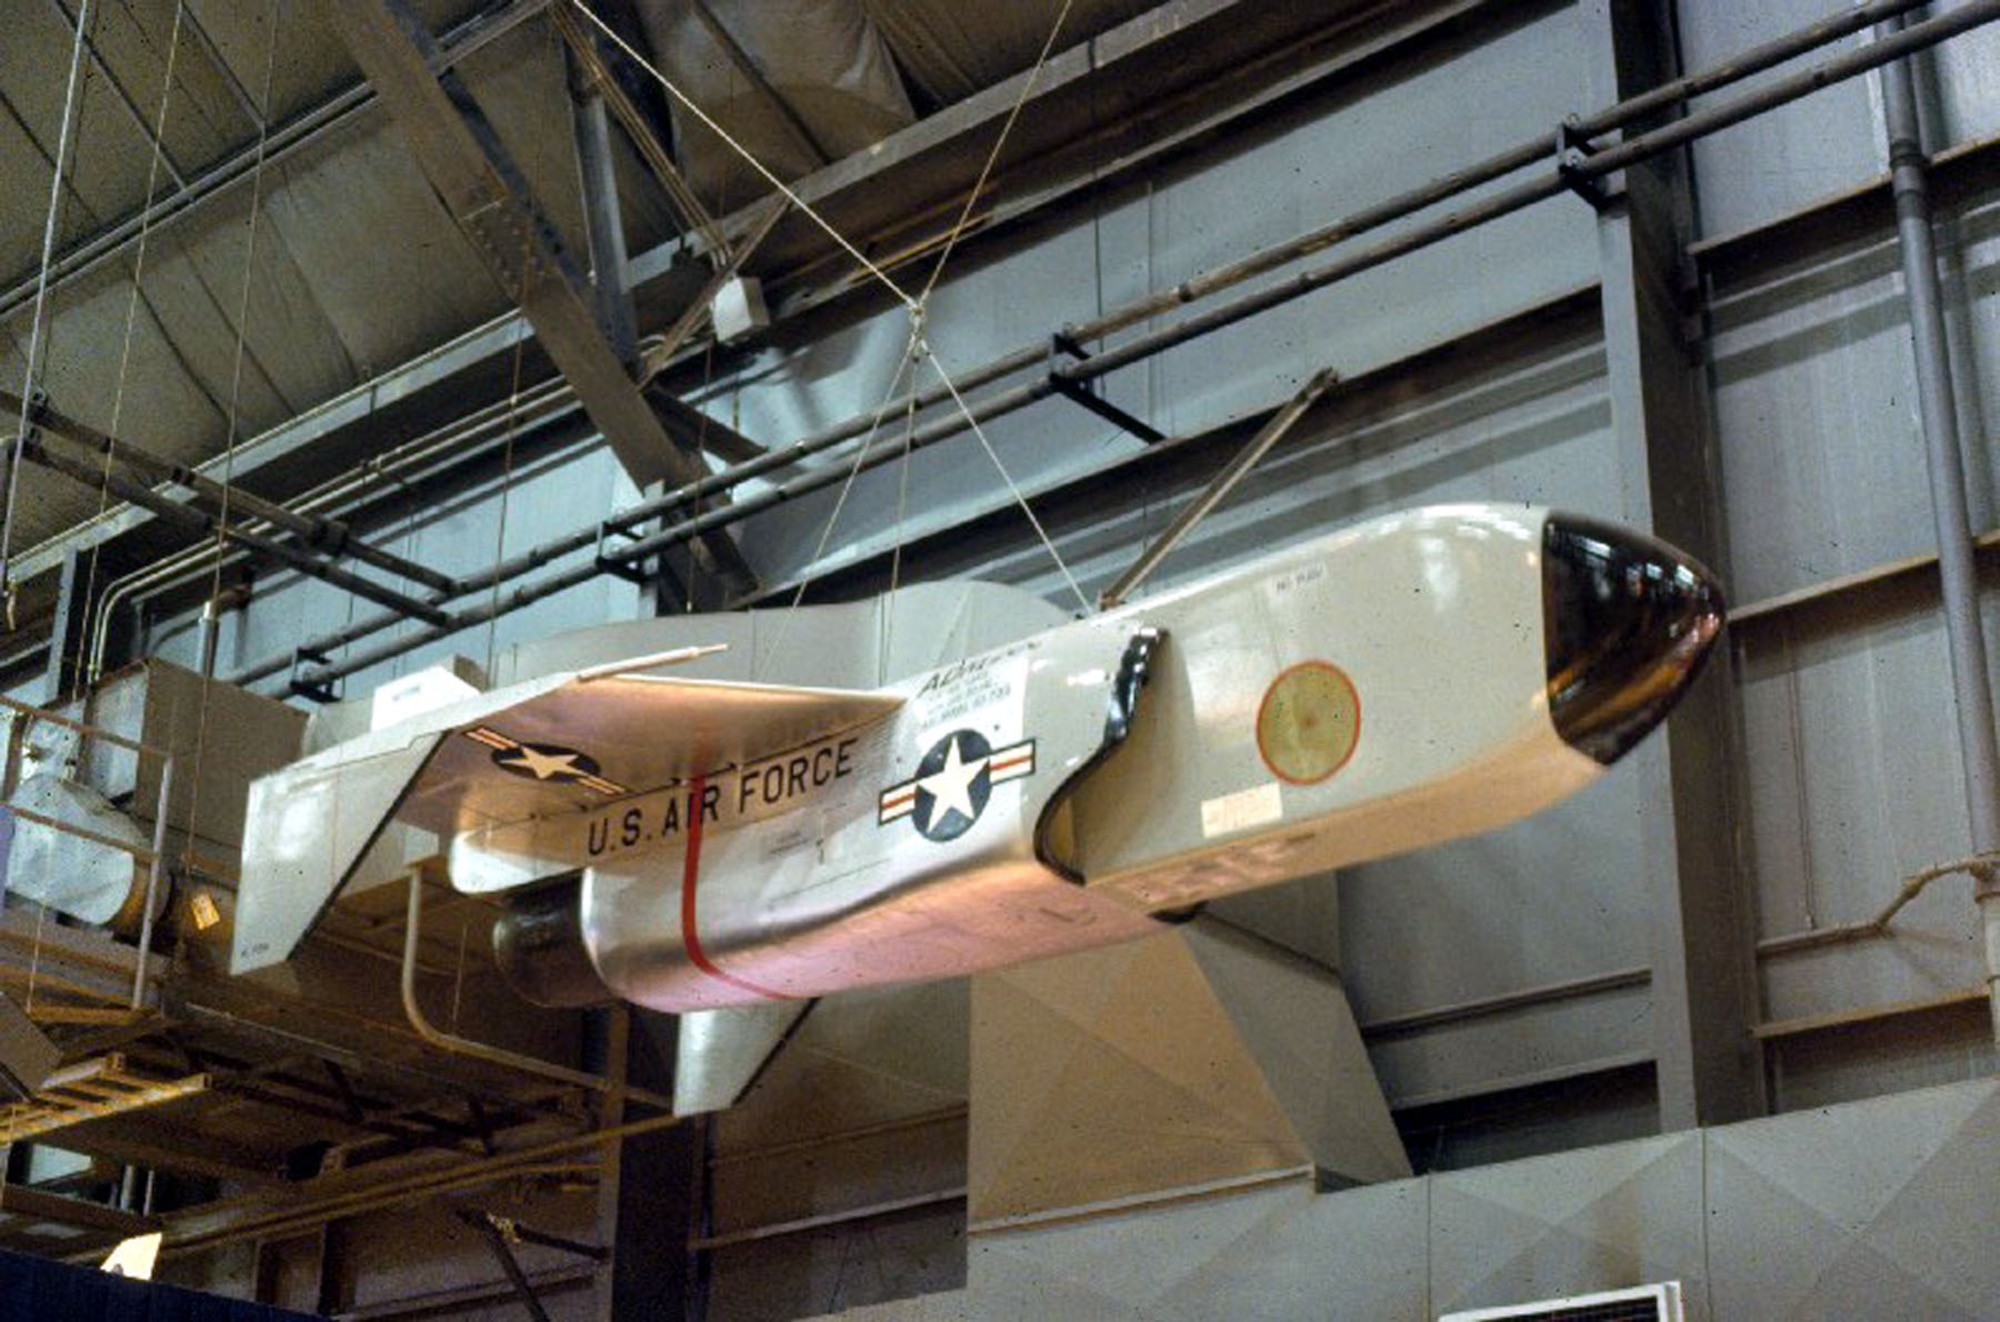 DAYTON, Ohio -- McDonnell ADM-20 Quail at the National Museum of the United States Air Force. (U.S. Air Force photo)